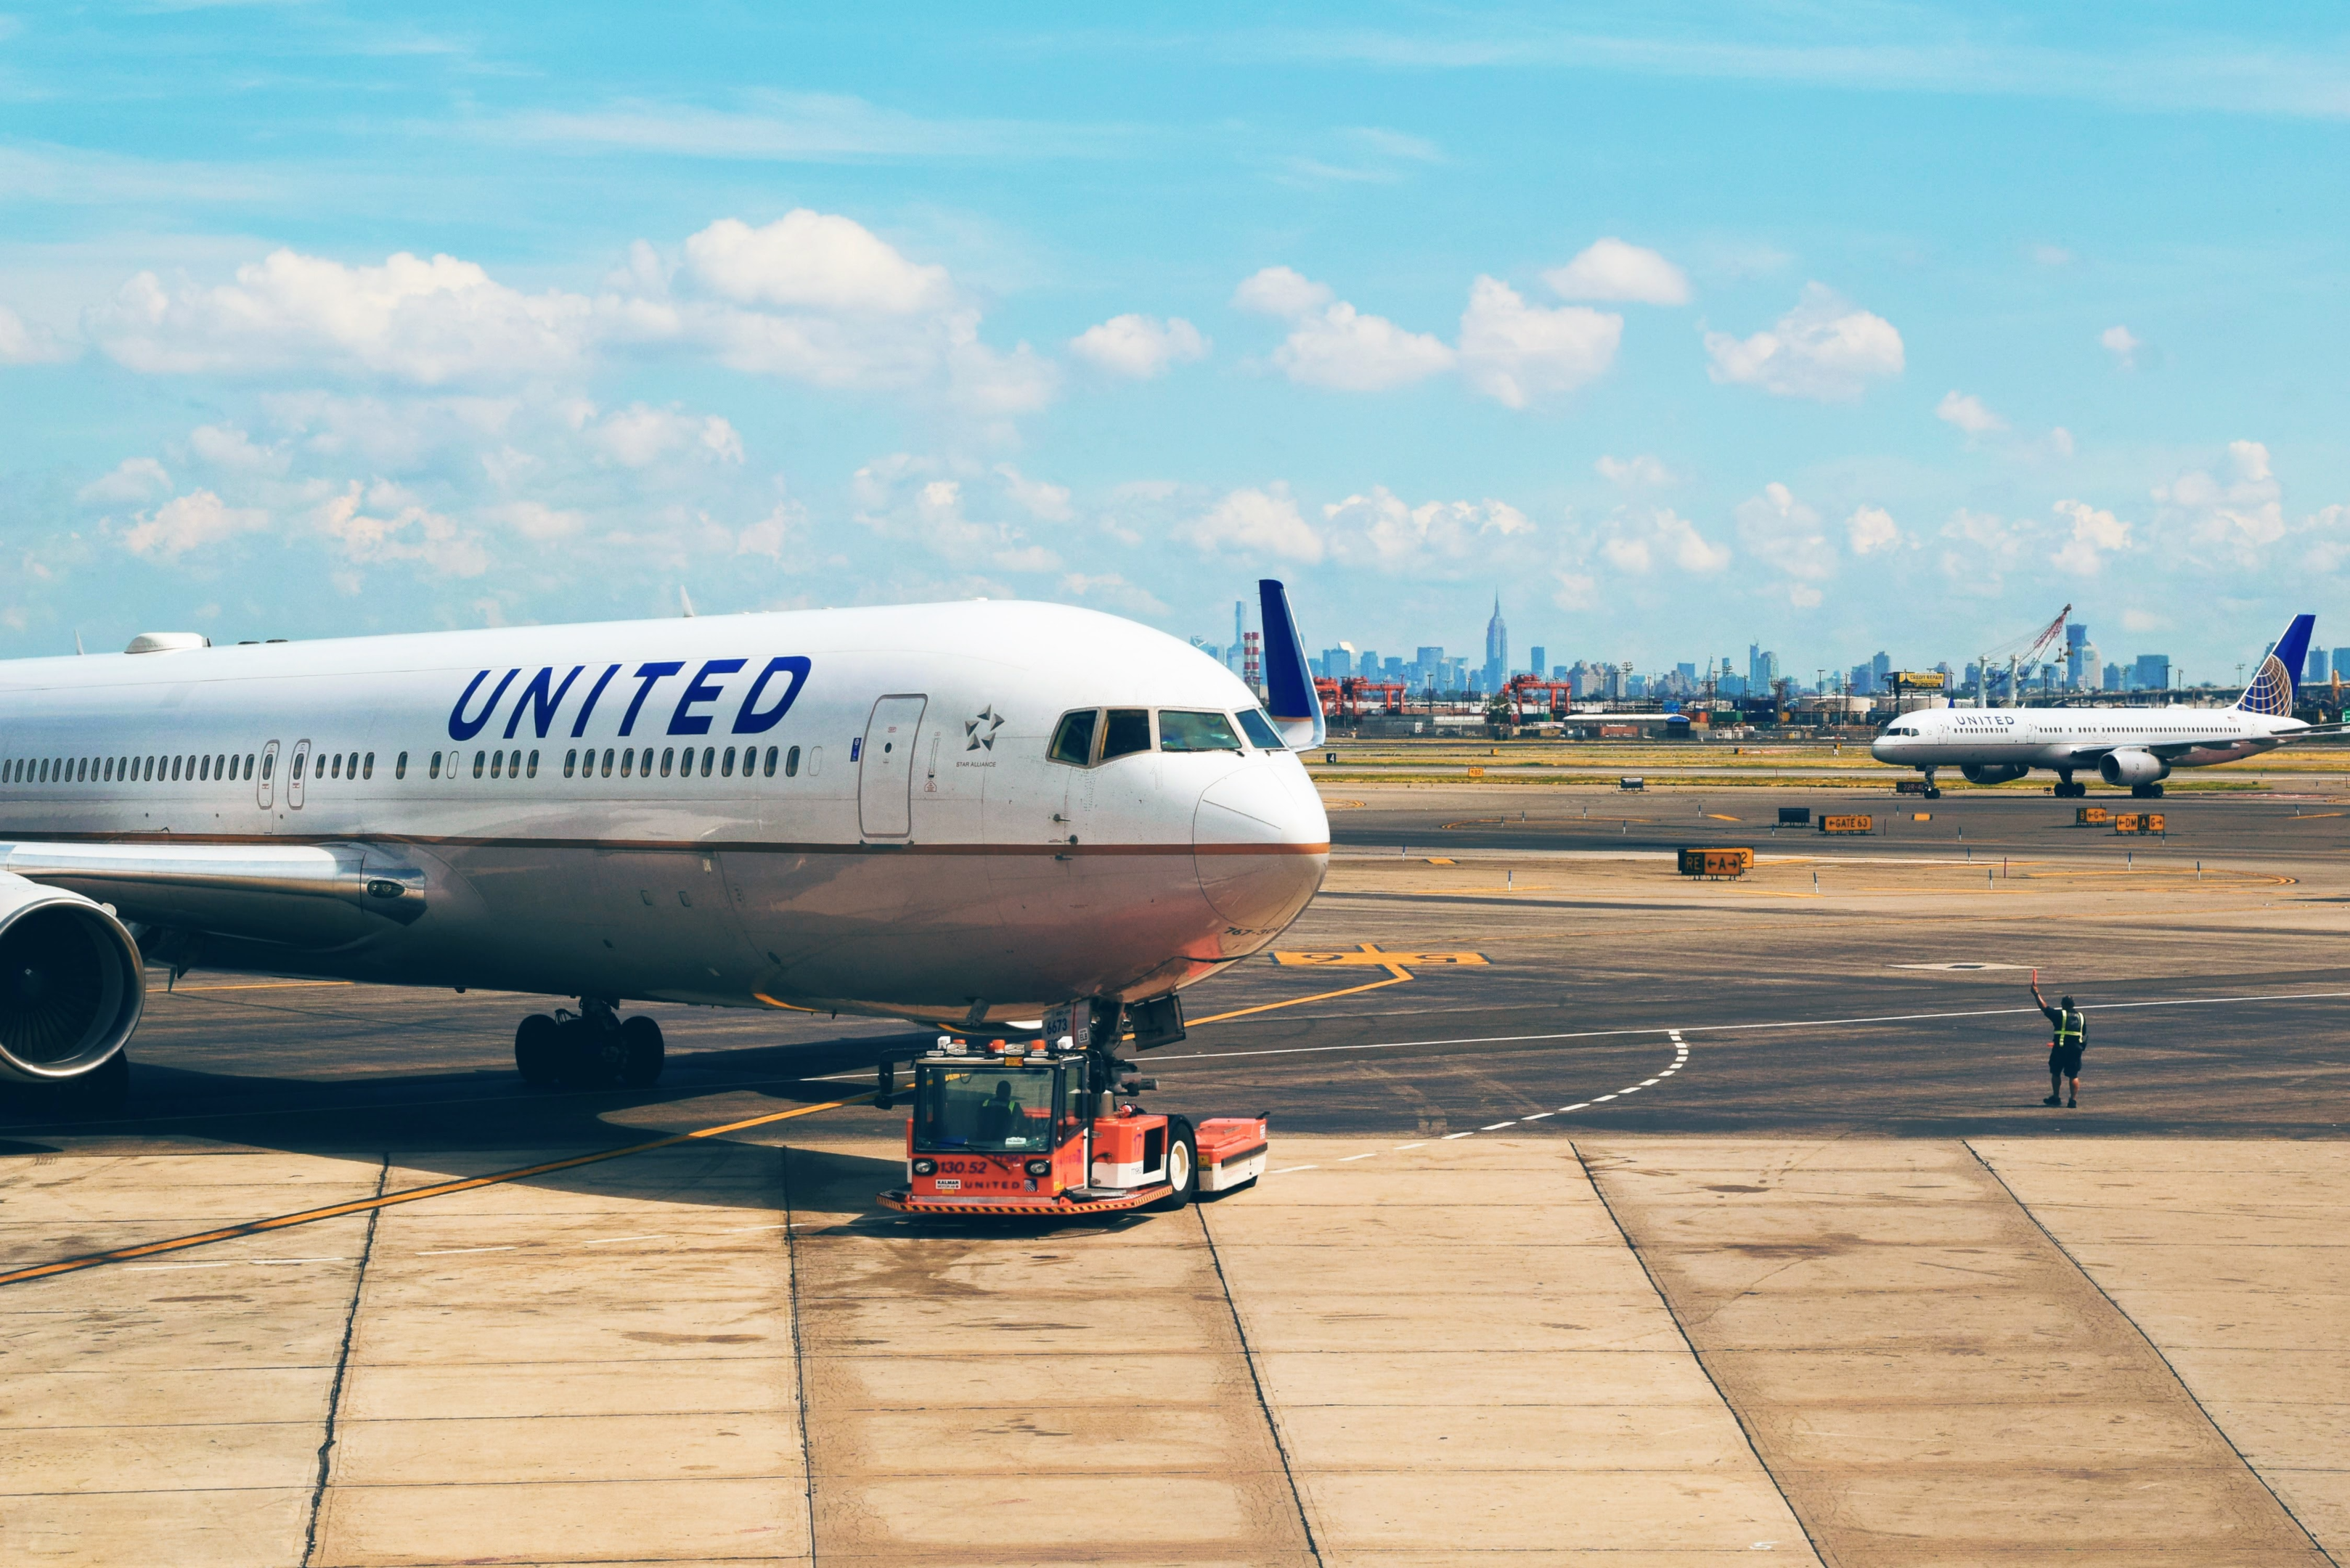 United Airlines aircraft being towed across taxi routes at an airport. Best airline to work for as a flight attendant.